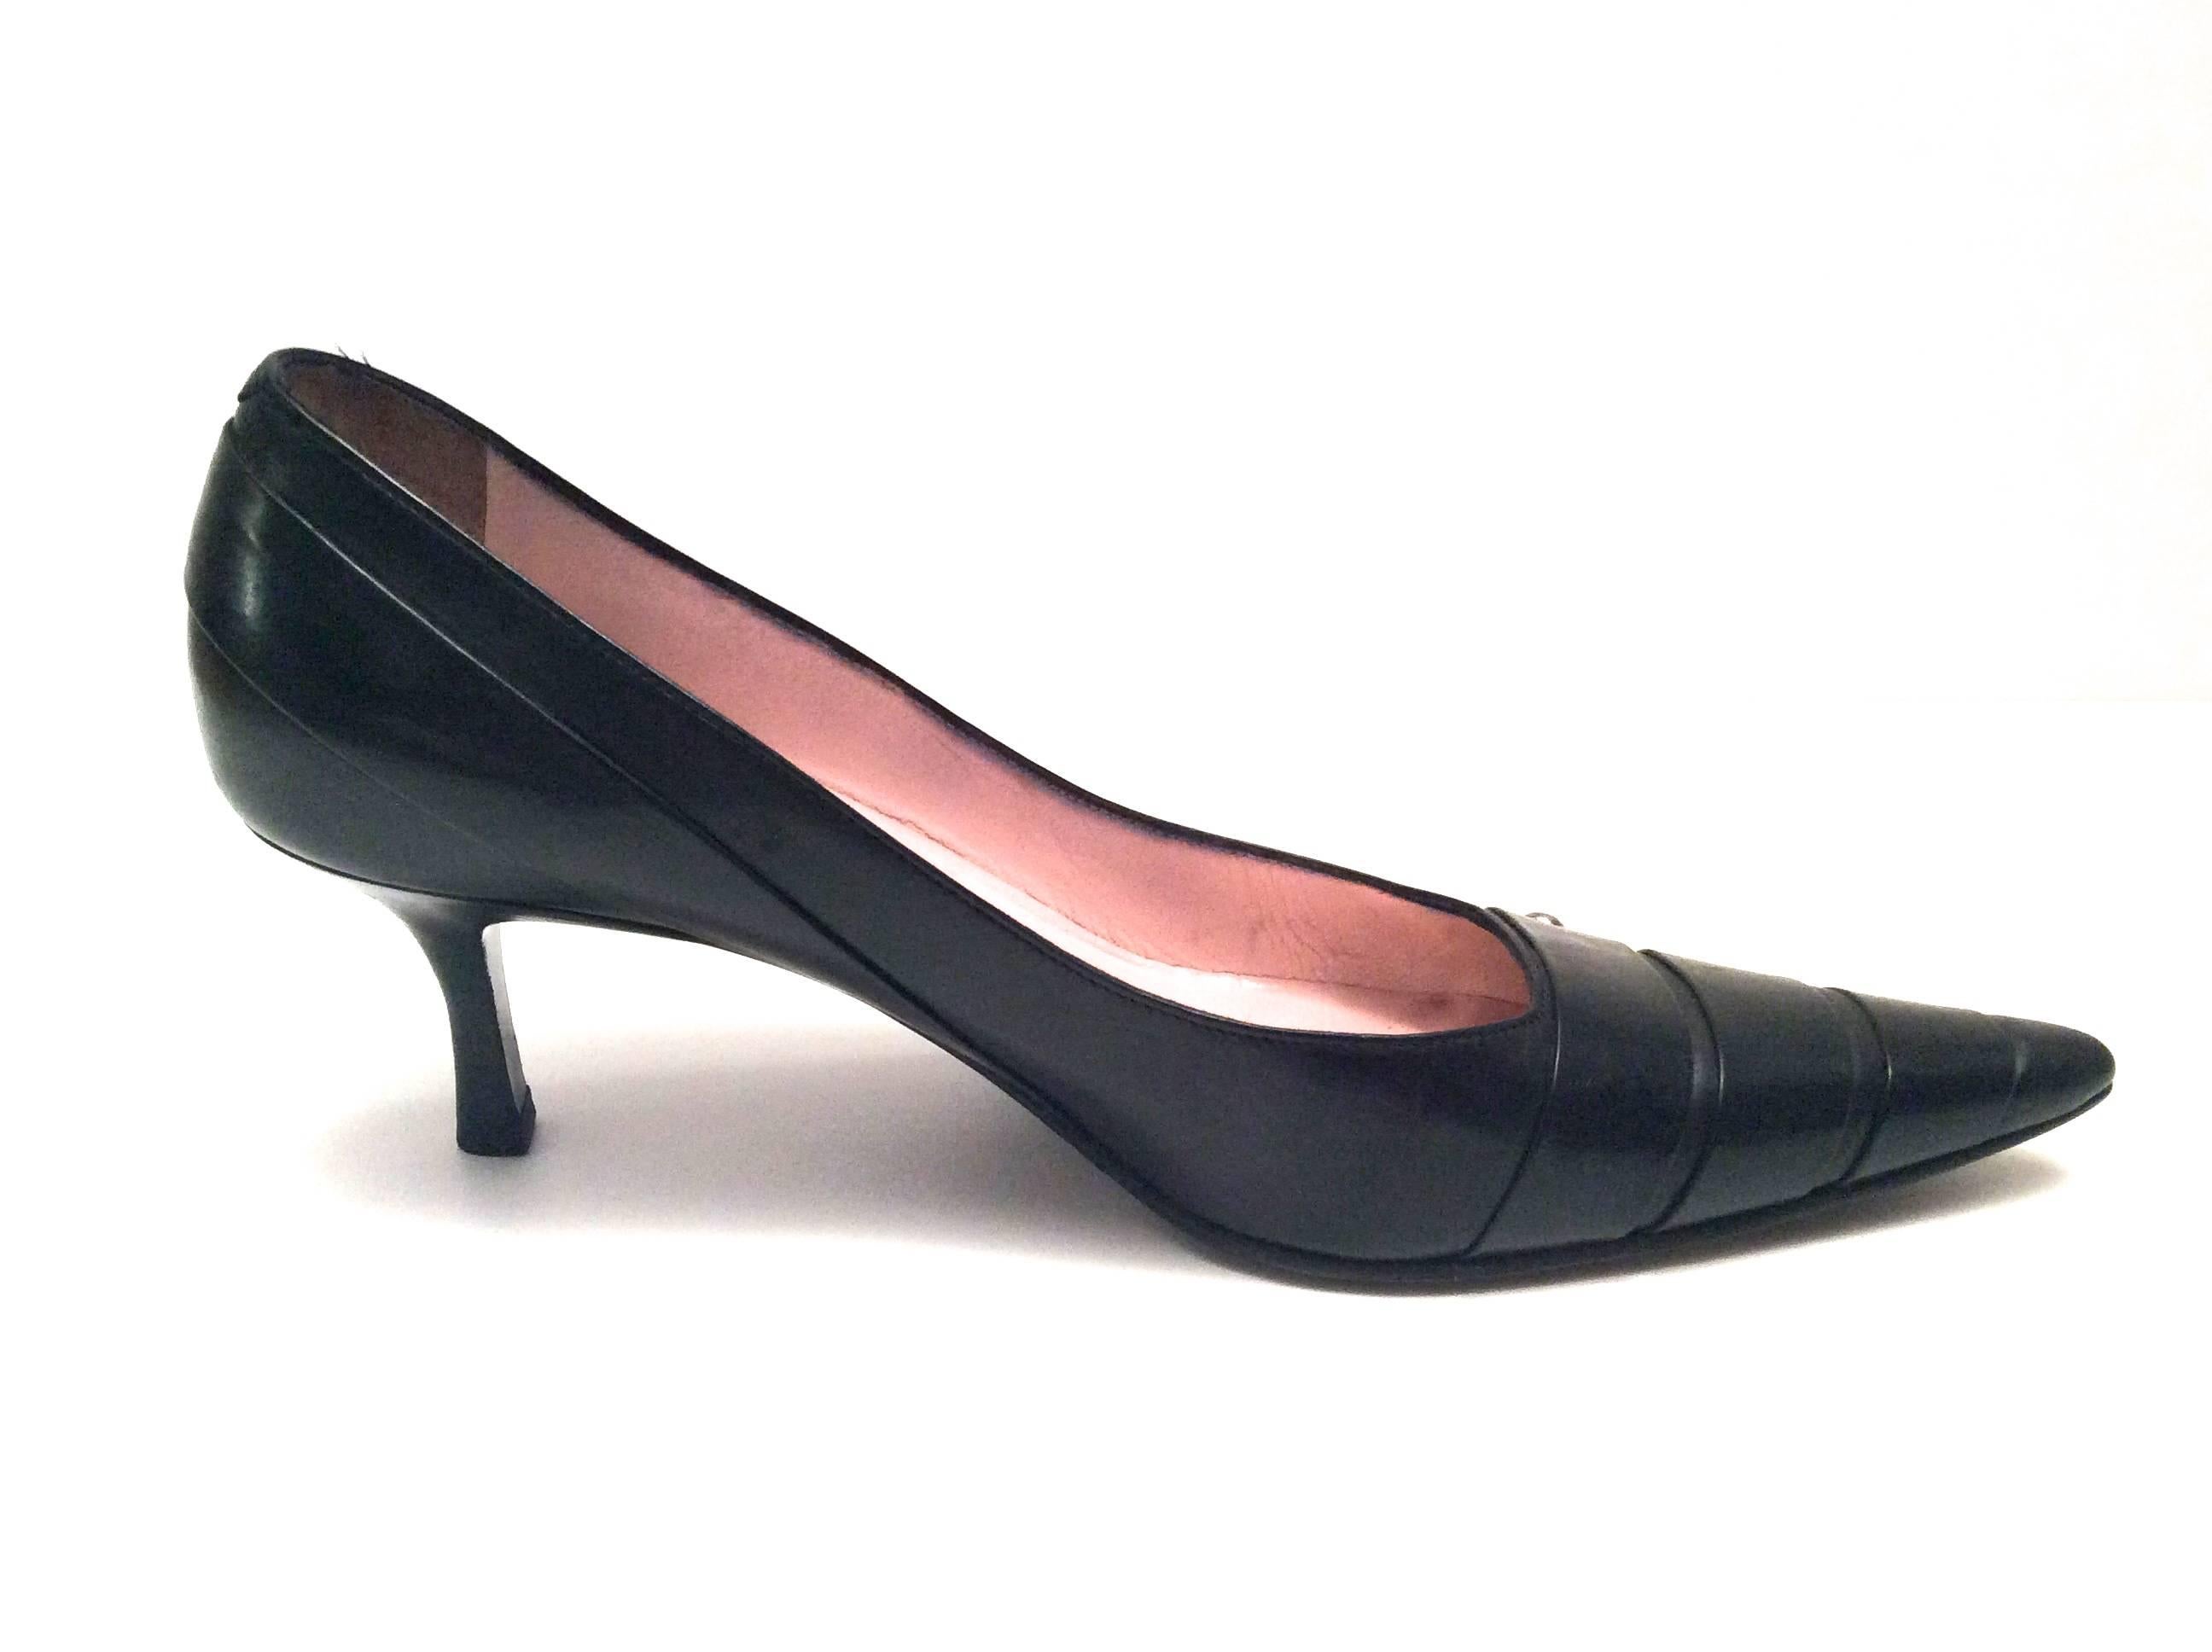 Chanel Black Leather Pumps - Size 38 In Excellent Condition For Sale In Boca Raton, FL